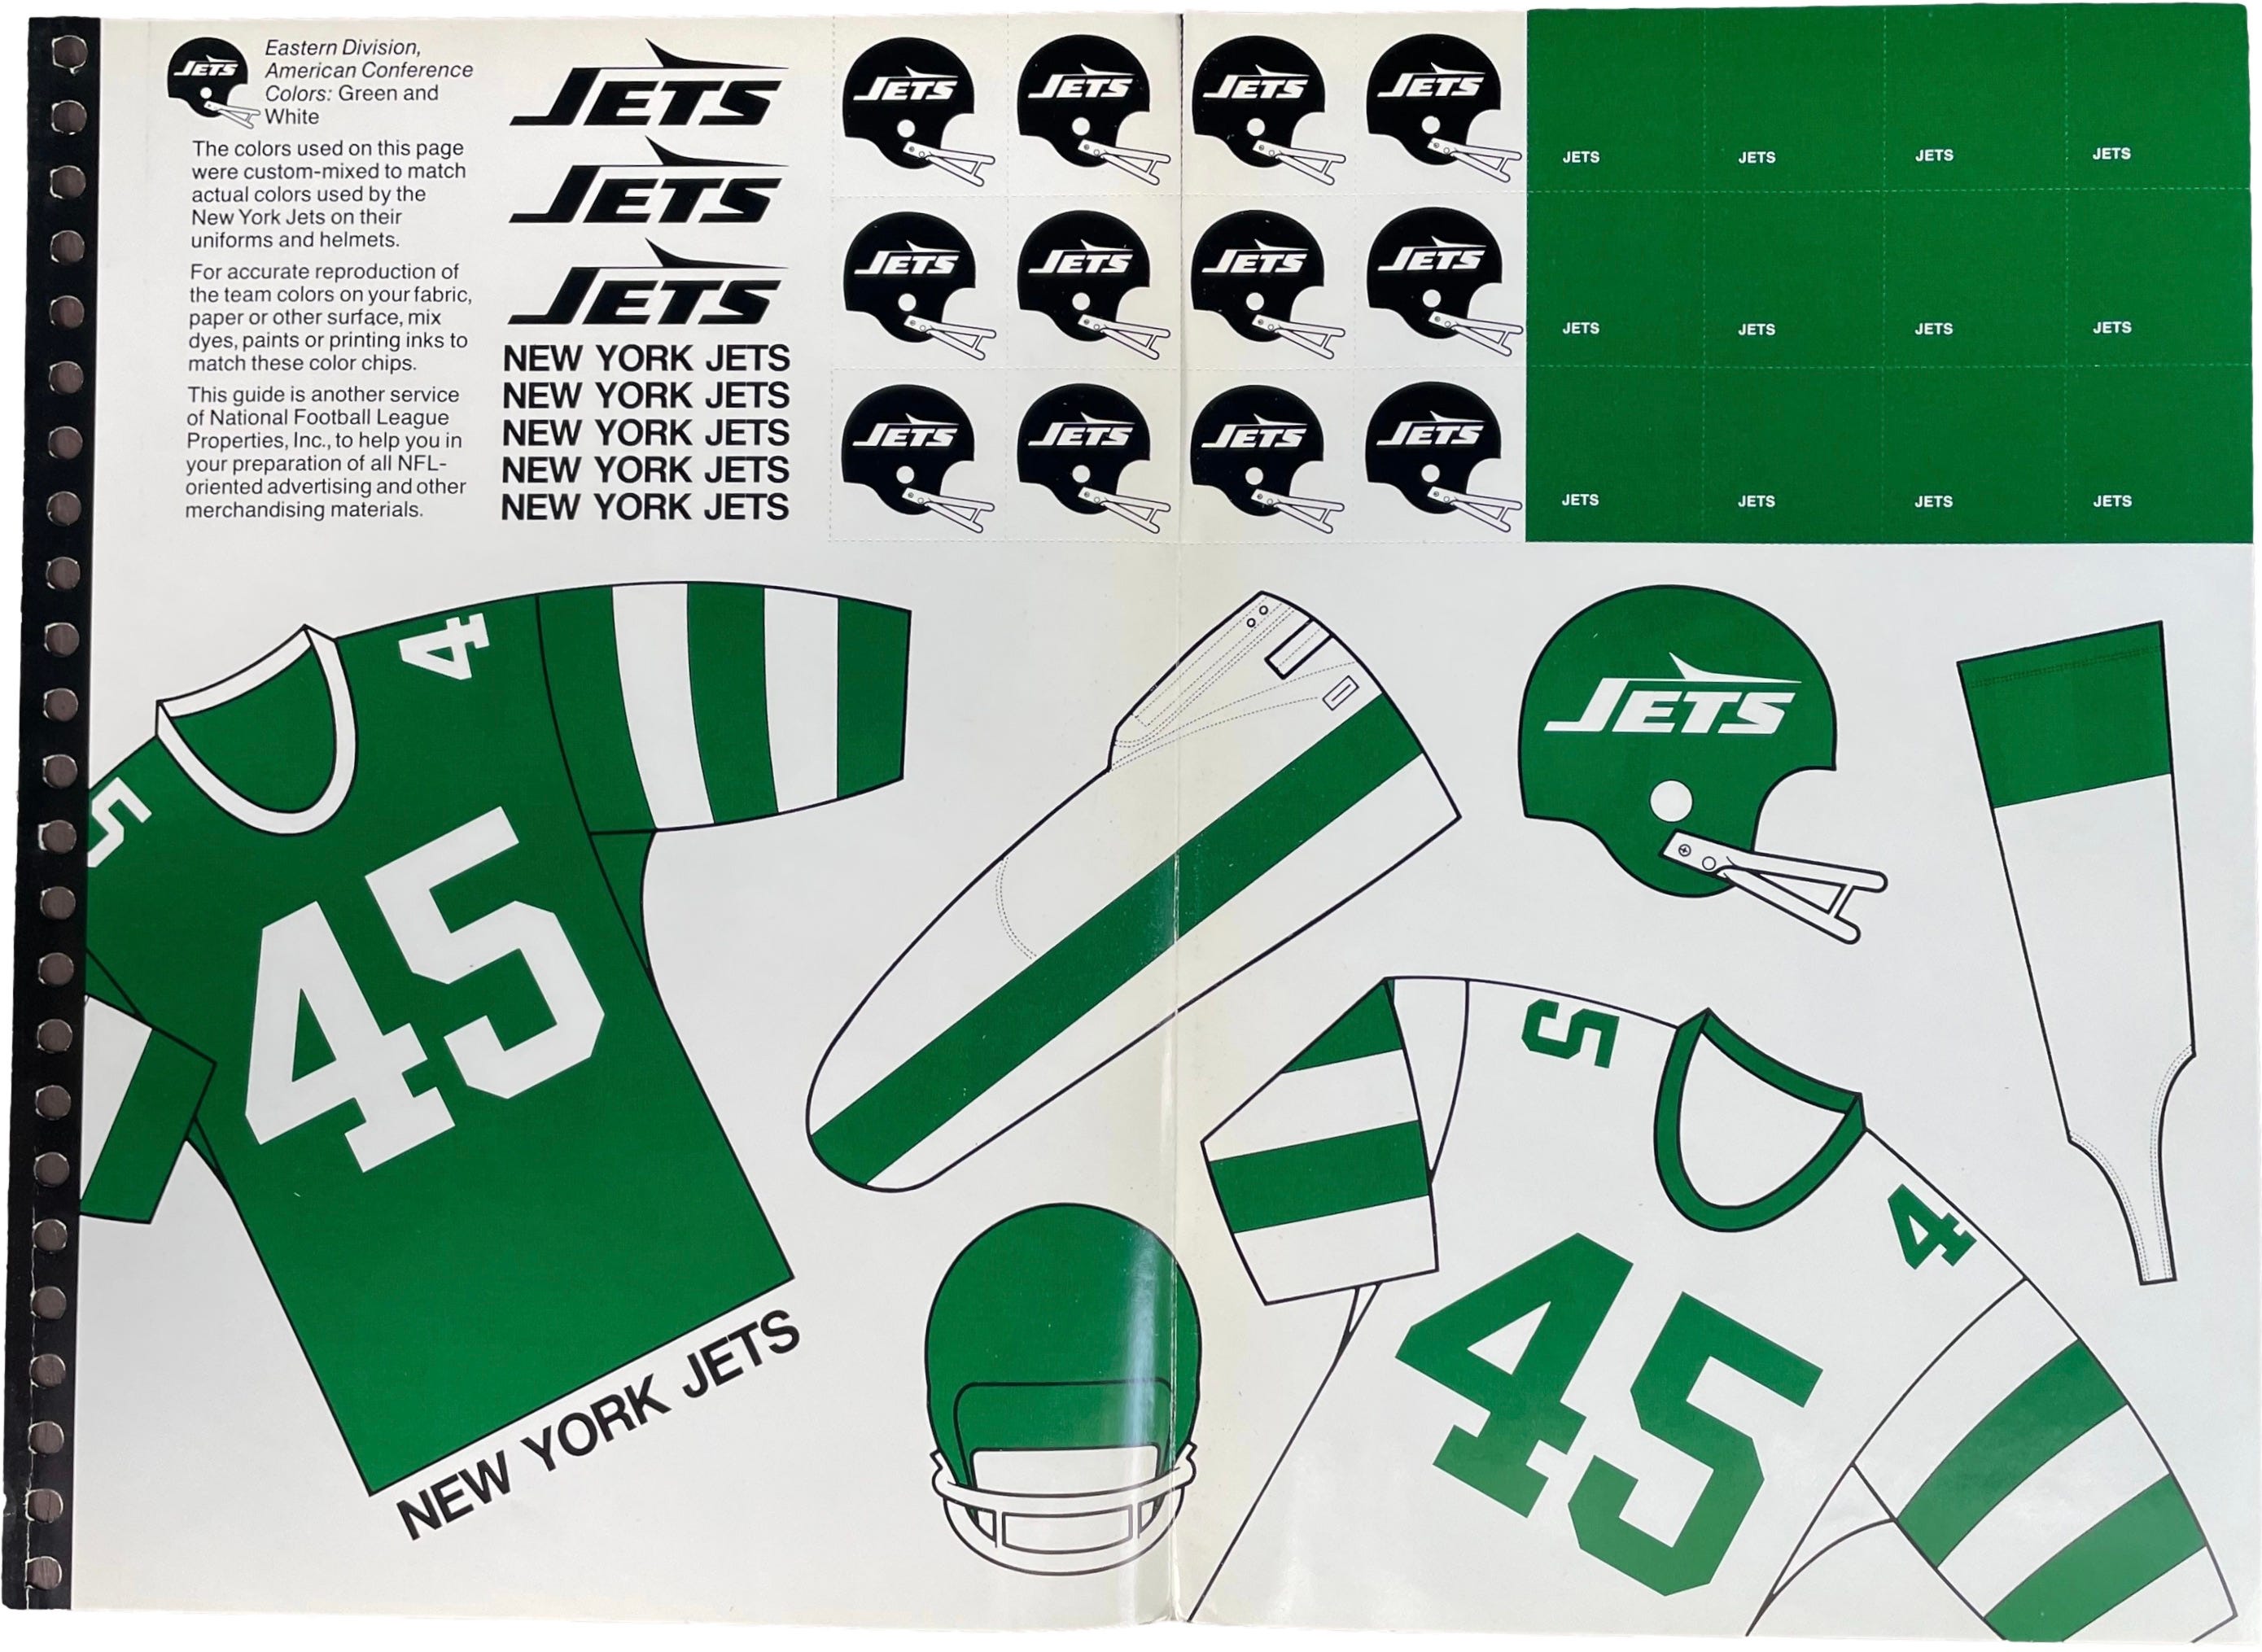 Flashback Friday: The '80s and '90s New York Jets Uniforms - Gang